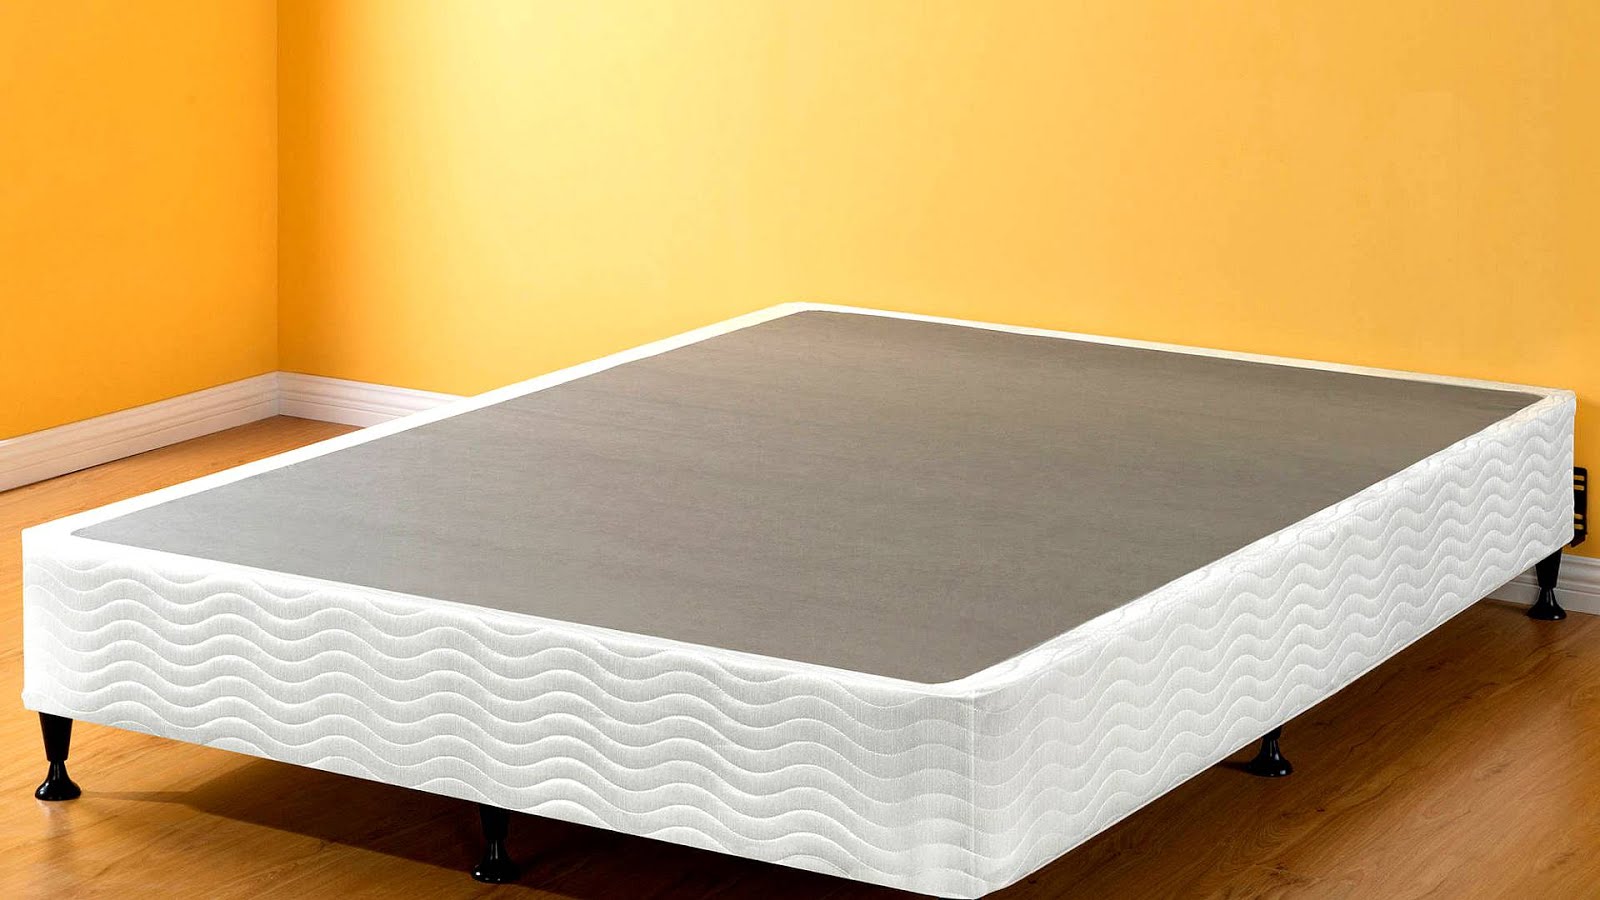 average weight of queen mattress and box spring